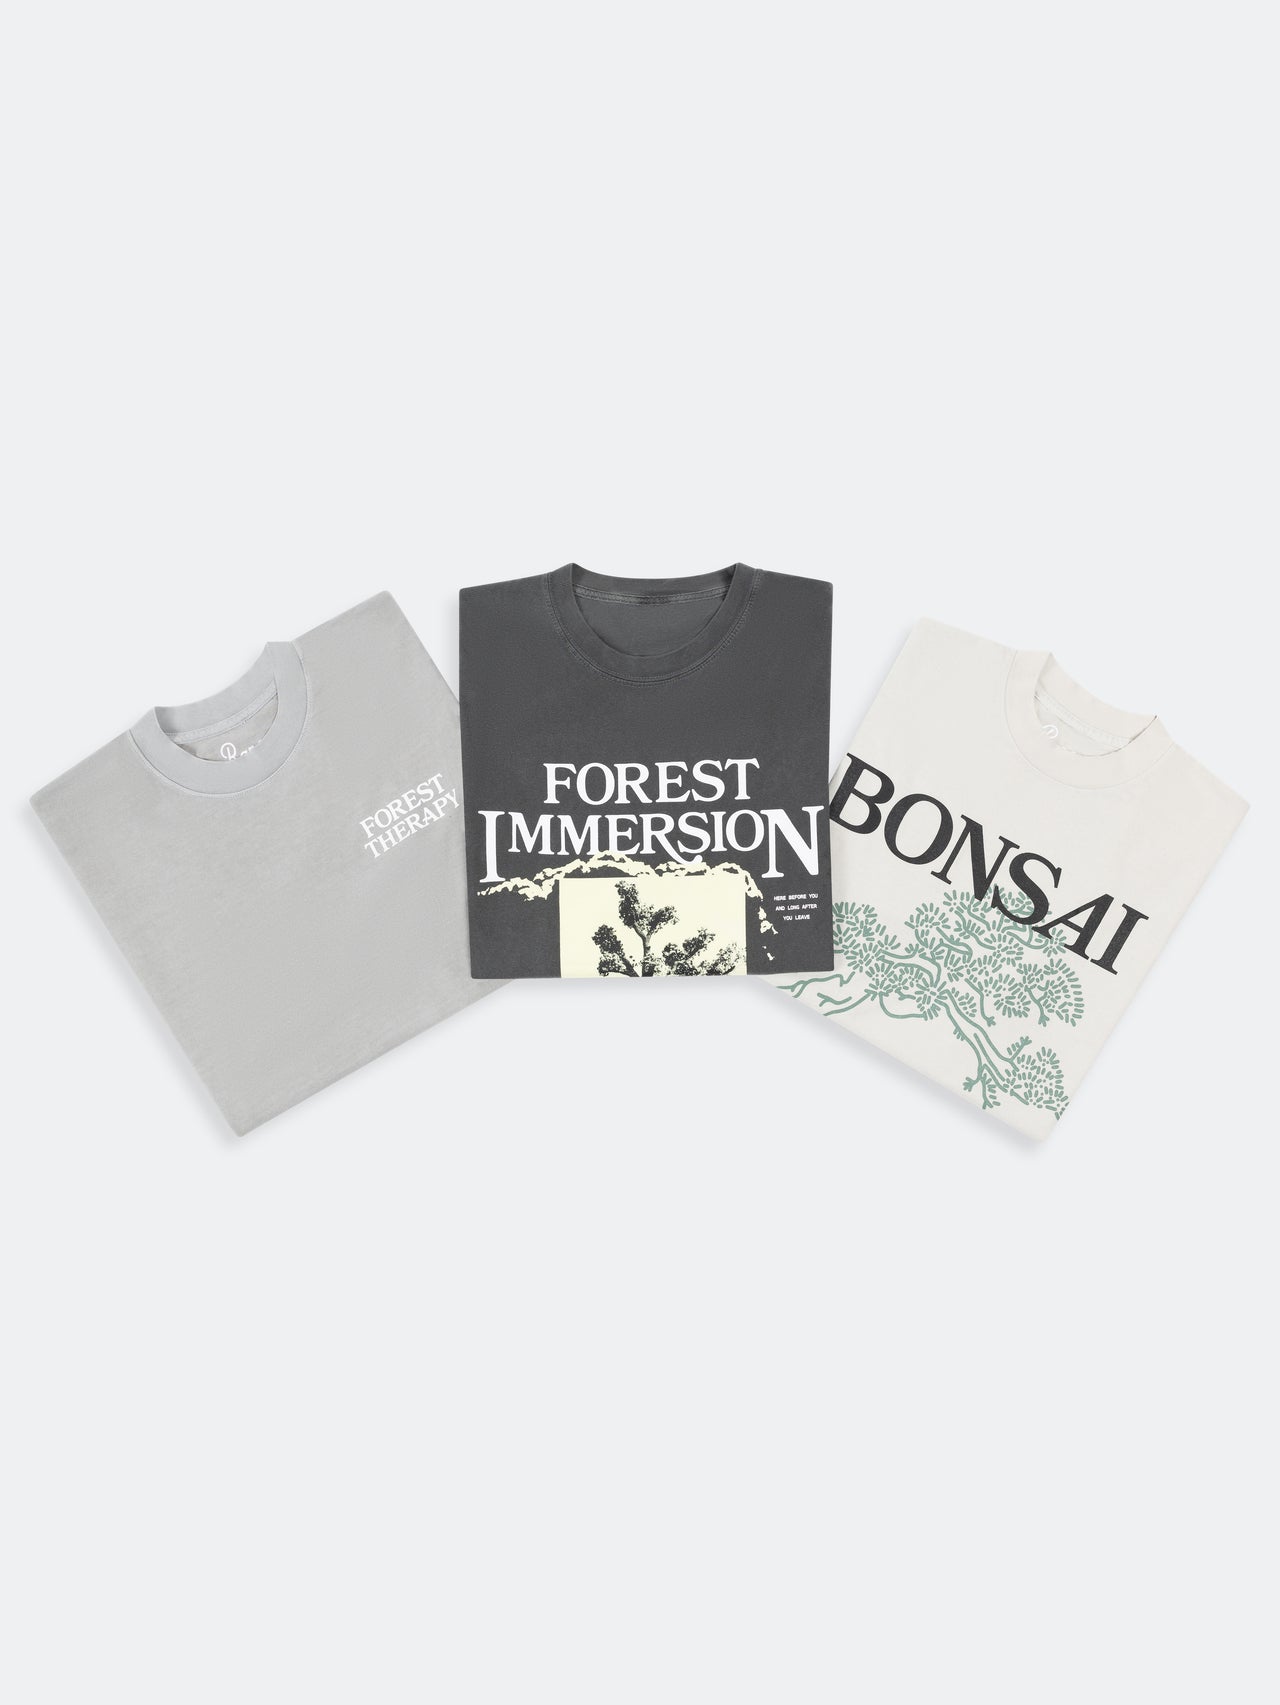 Immersion Tee - Charcoal